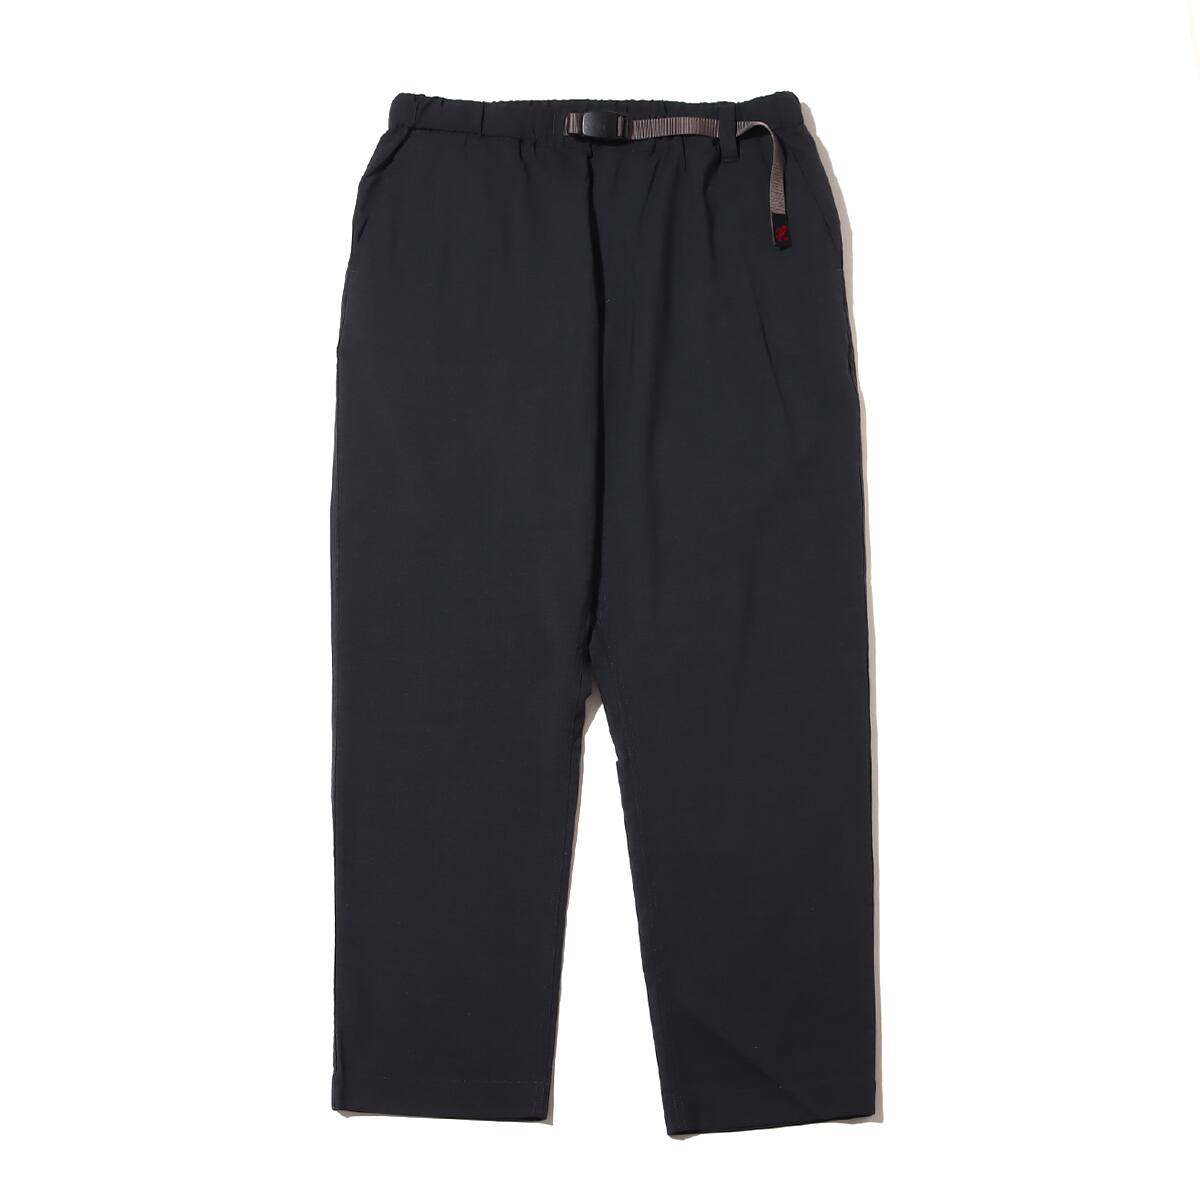 WHITE MOUNTAINEERING × GRAMICCI TECH WOOLLY TAPERED PANTS CHARCOAL